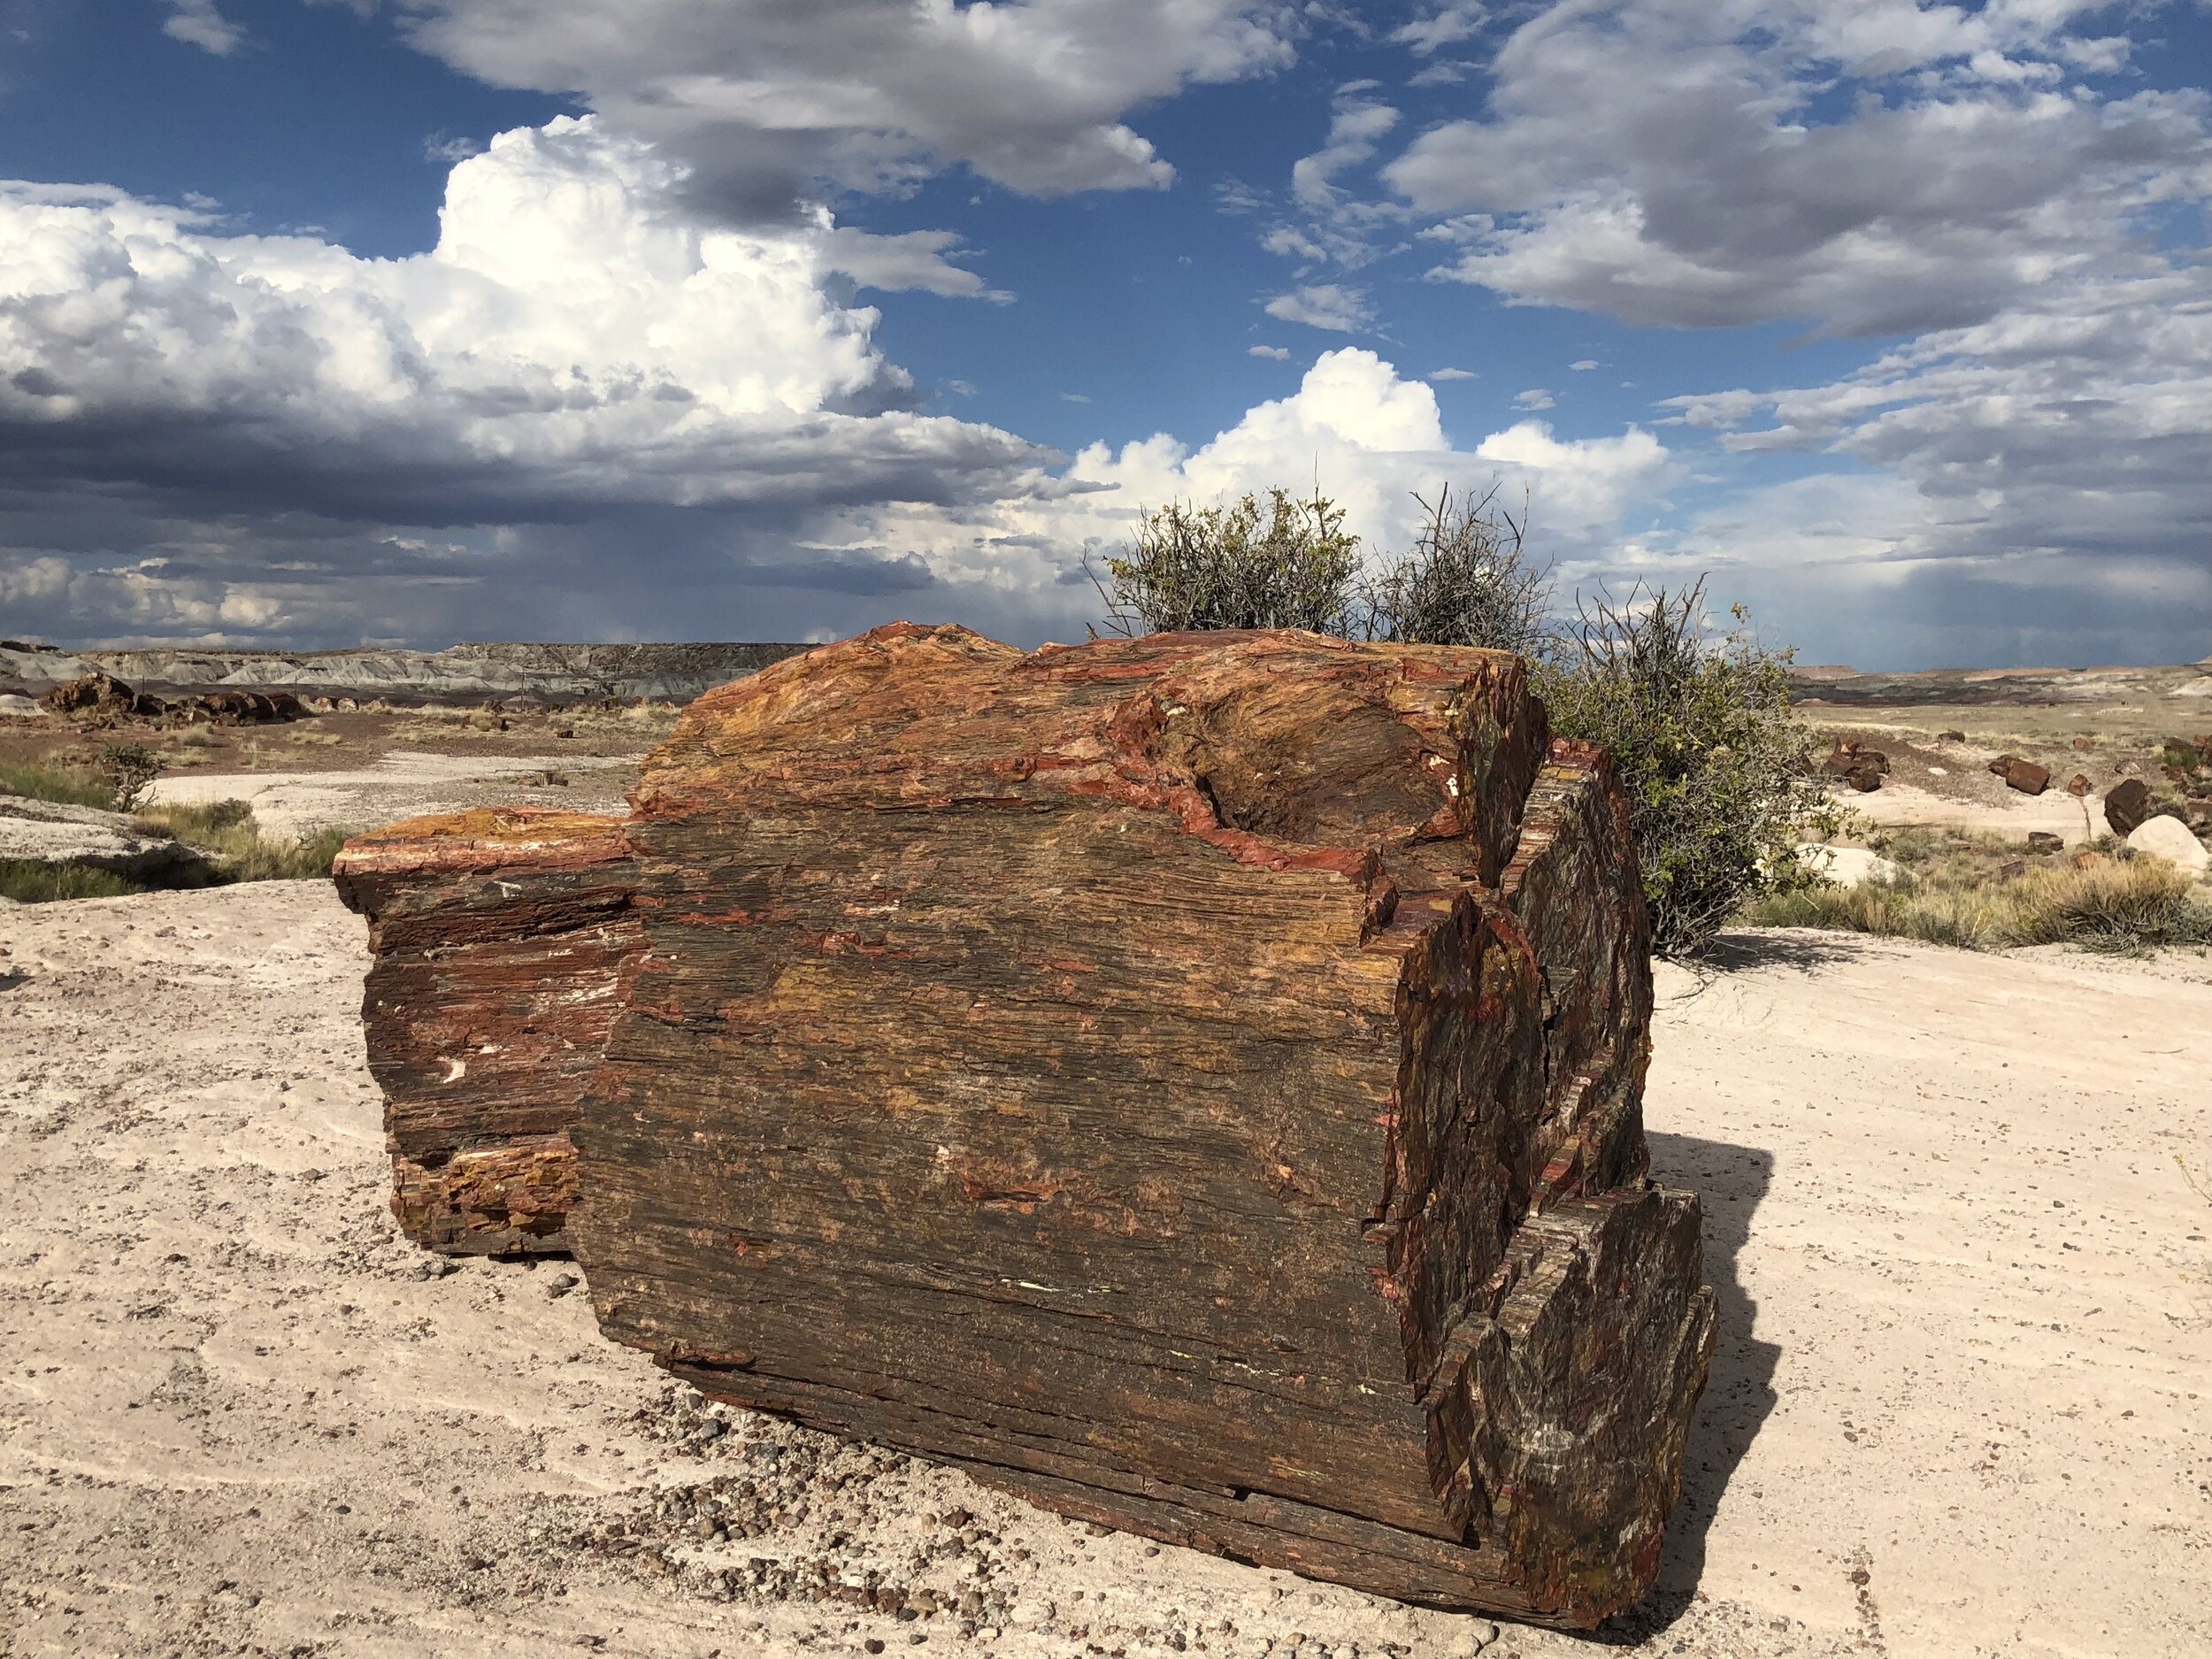 The park features many square miles of petrified wood, but it holds other attractions as well.